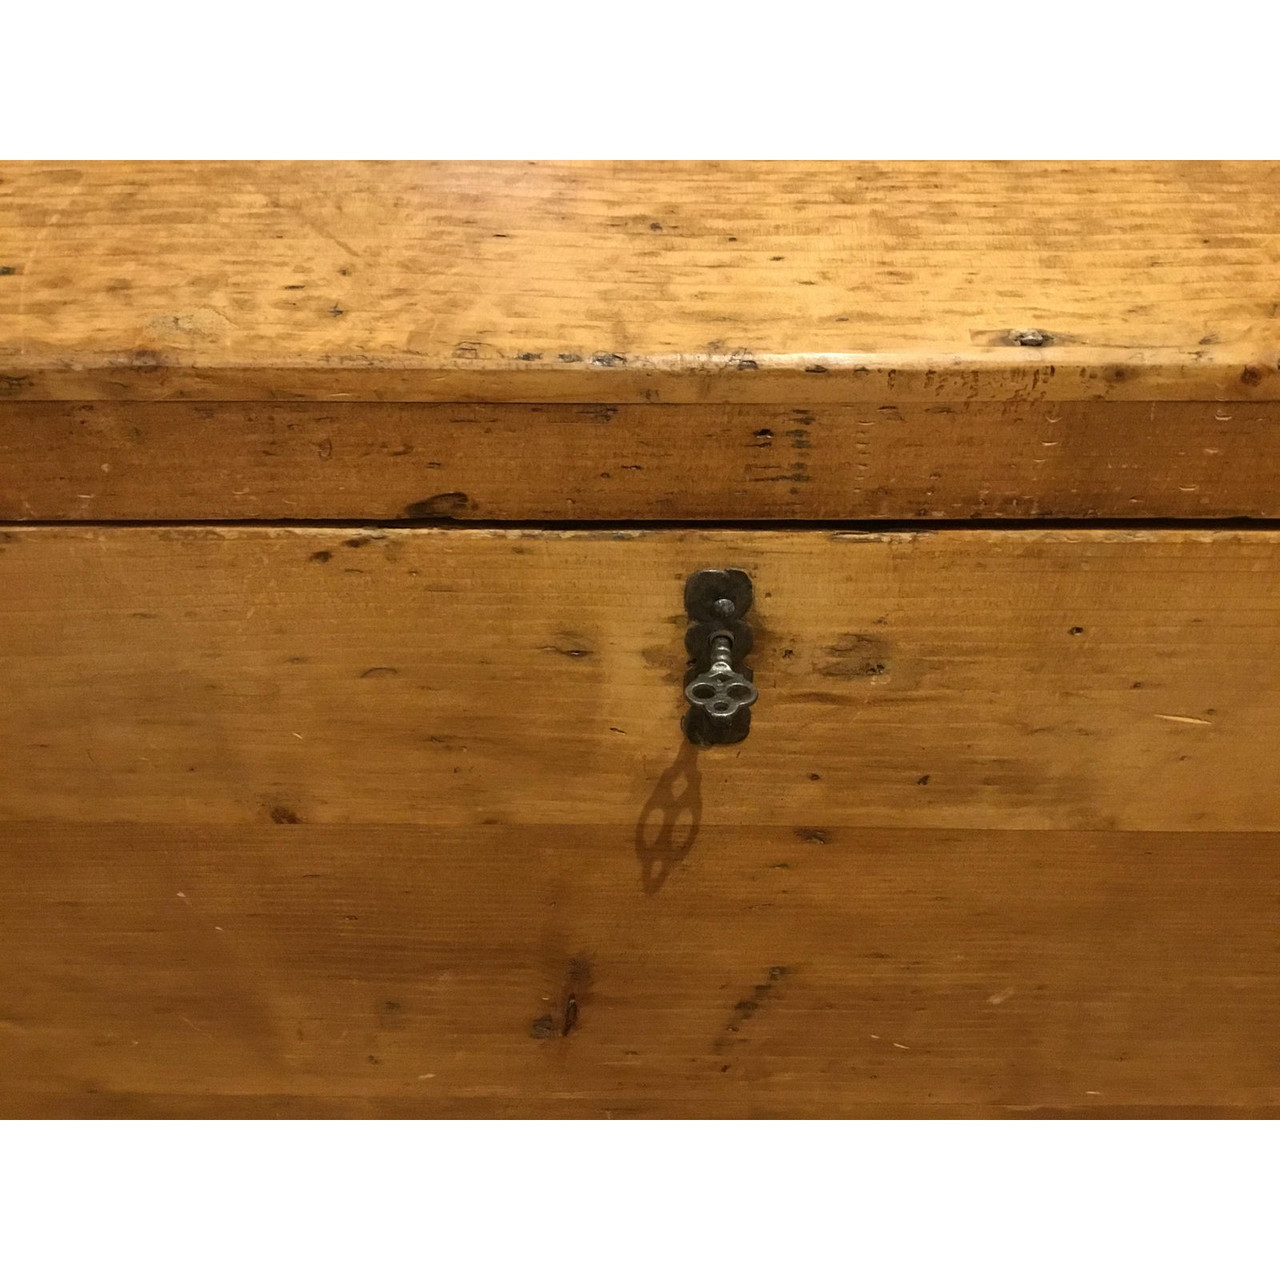 Circa 1870s Domed Top Wooden Trunk #1604830